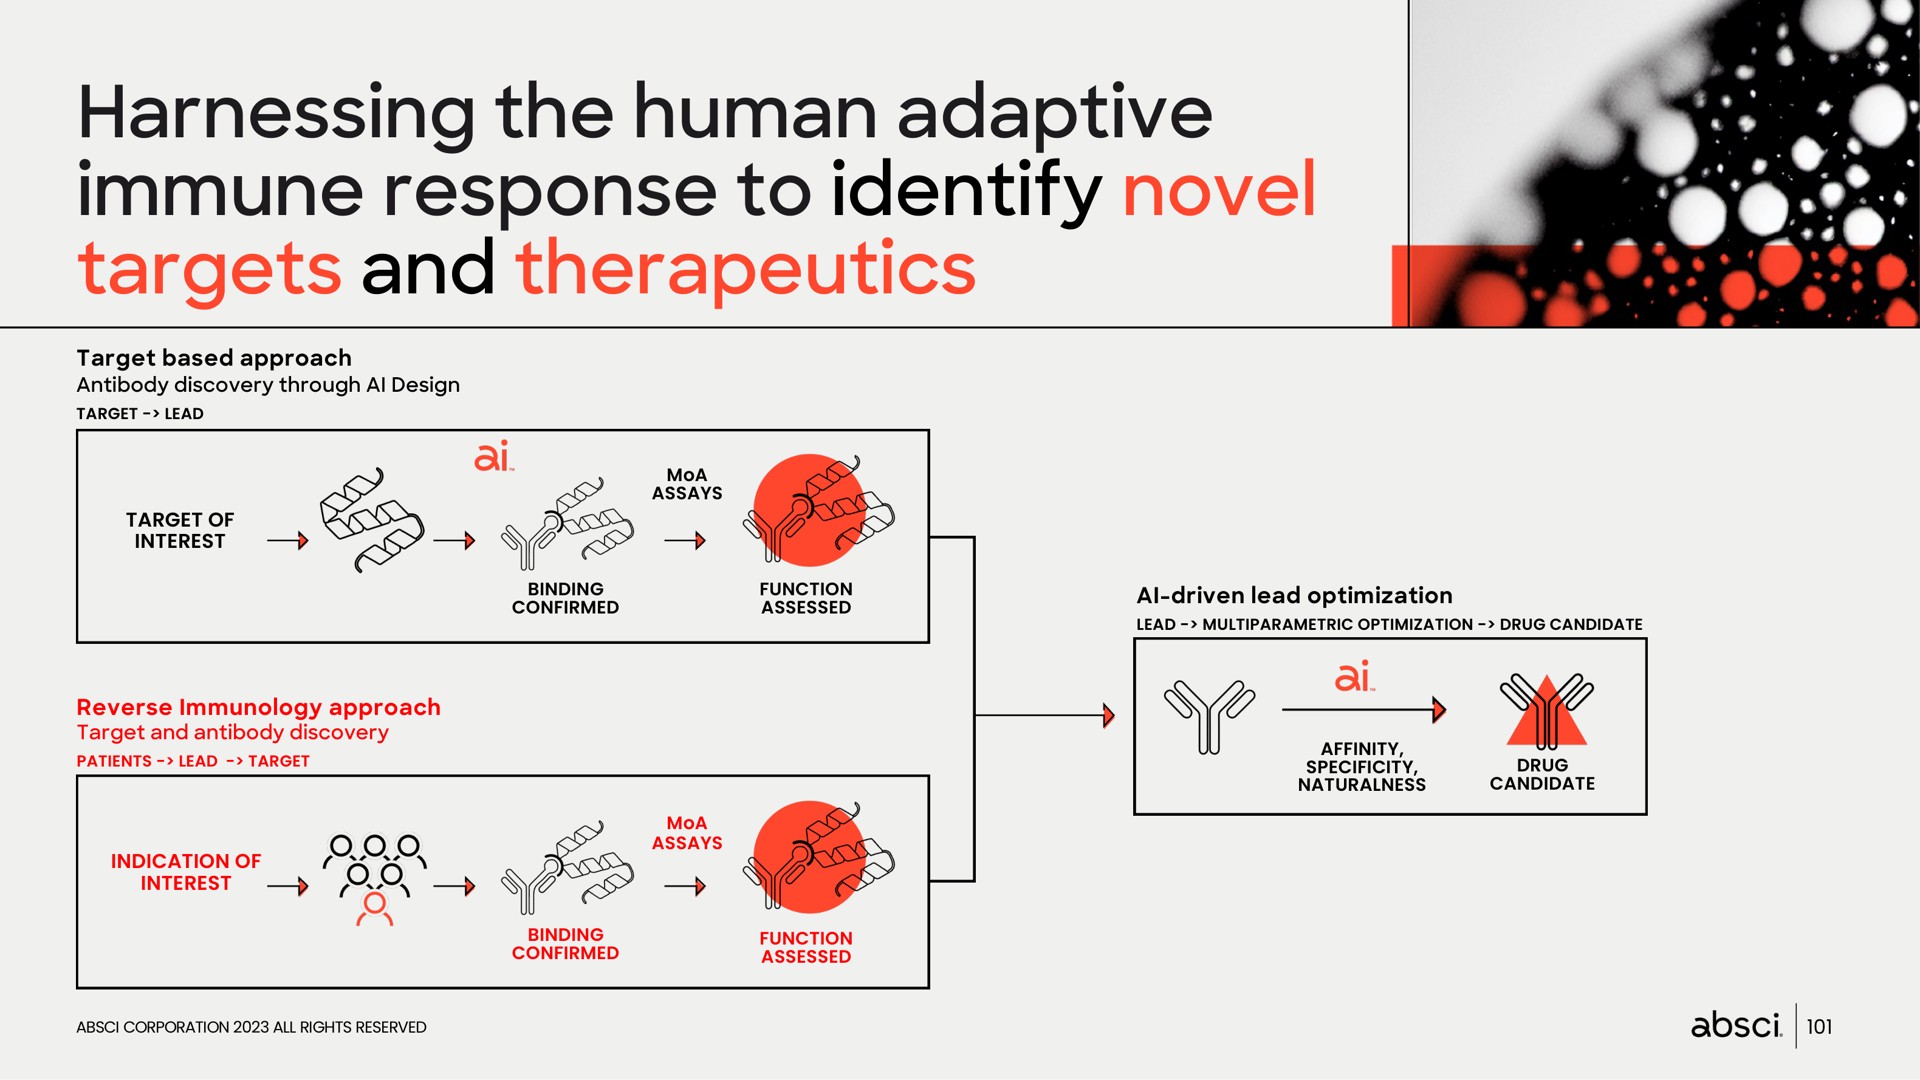 harnessing the human adaptive immune response to identify novel targets and therapeutics | Absci